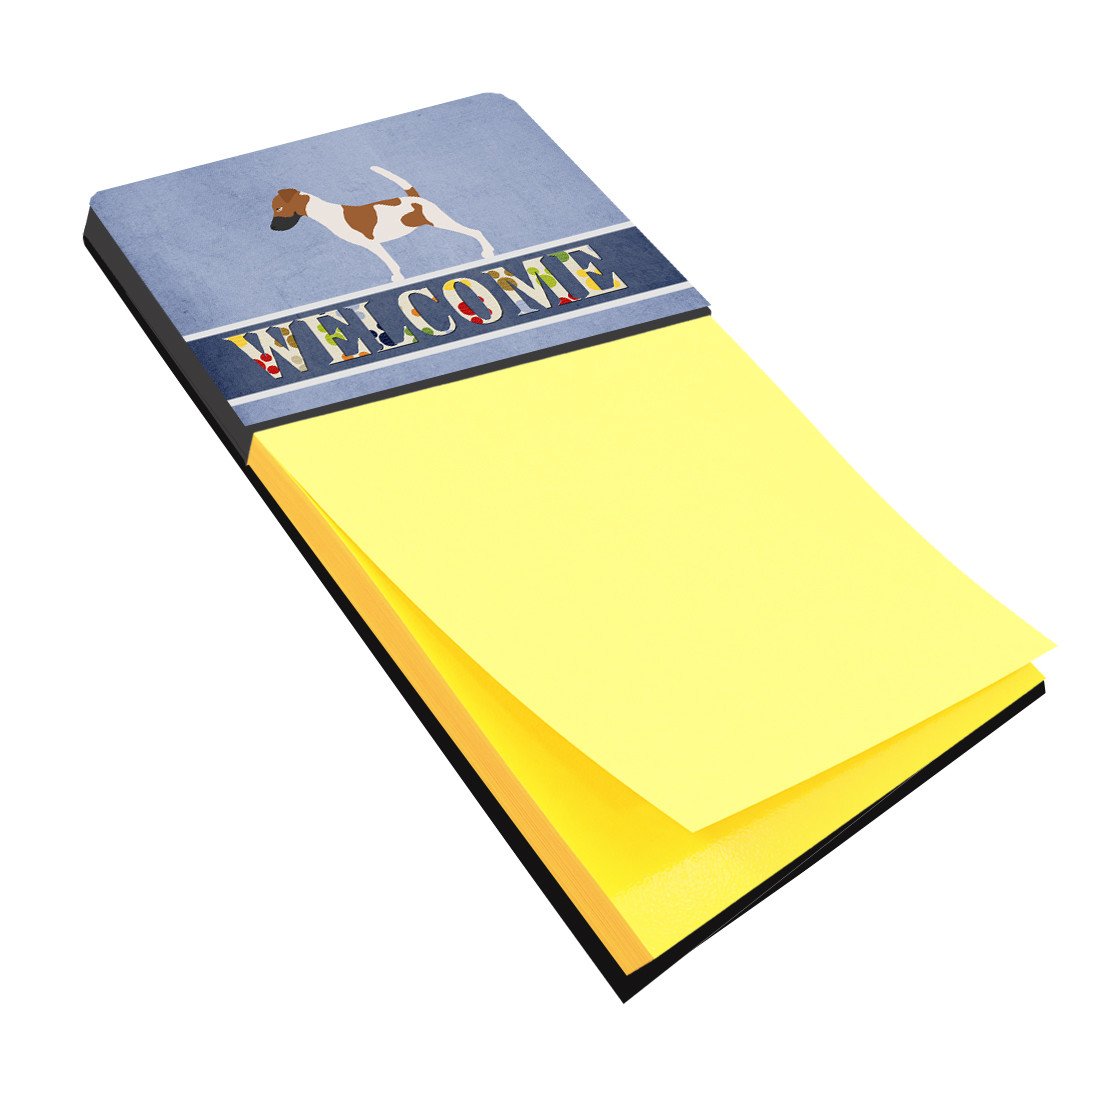 Smooth Fox Terrier Welcome Sticky Note Holder BB8279SN by Caroline's Treasures